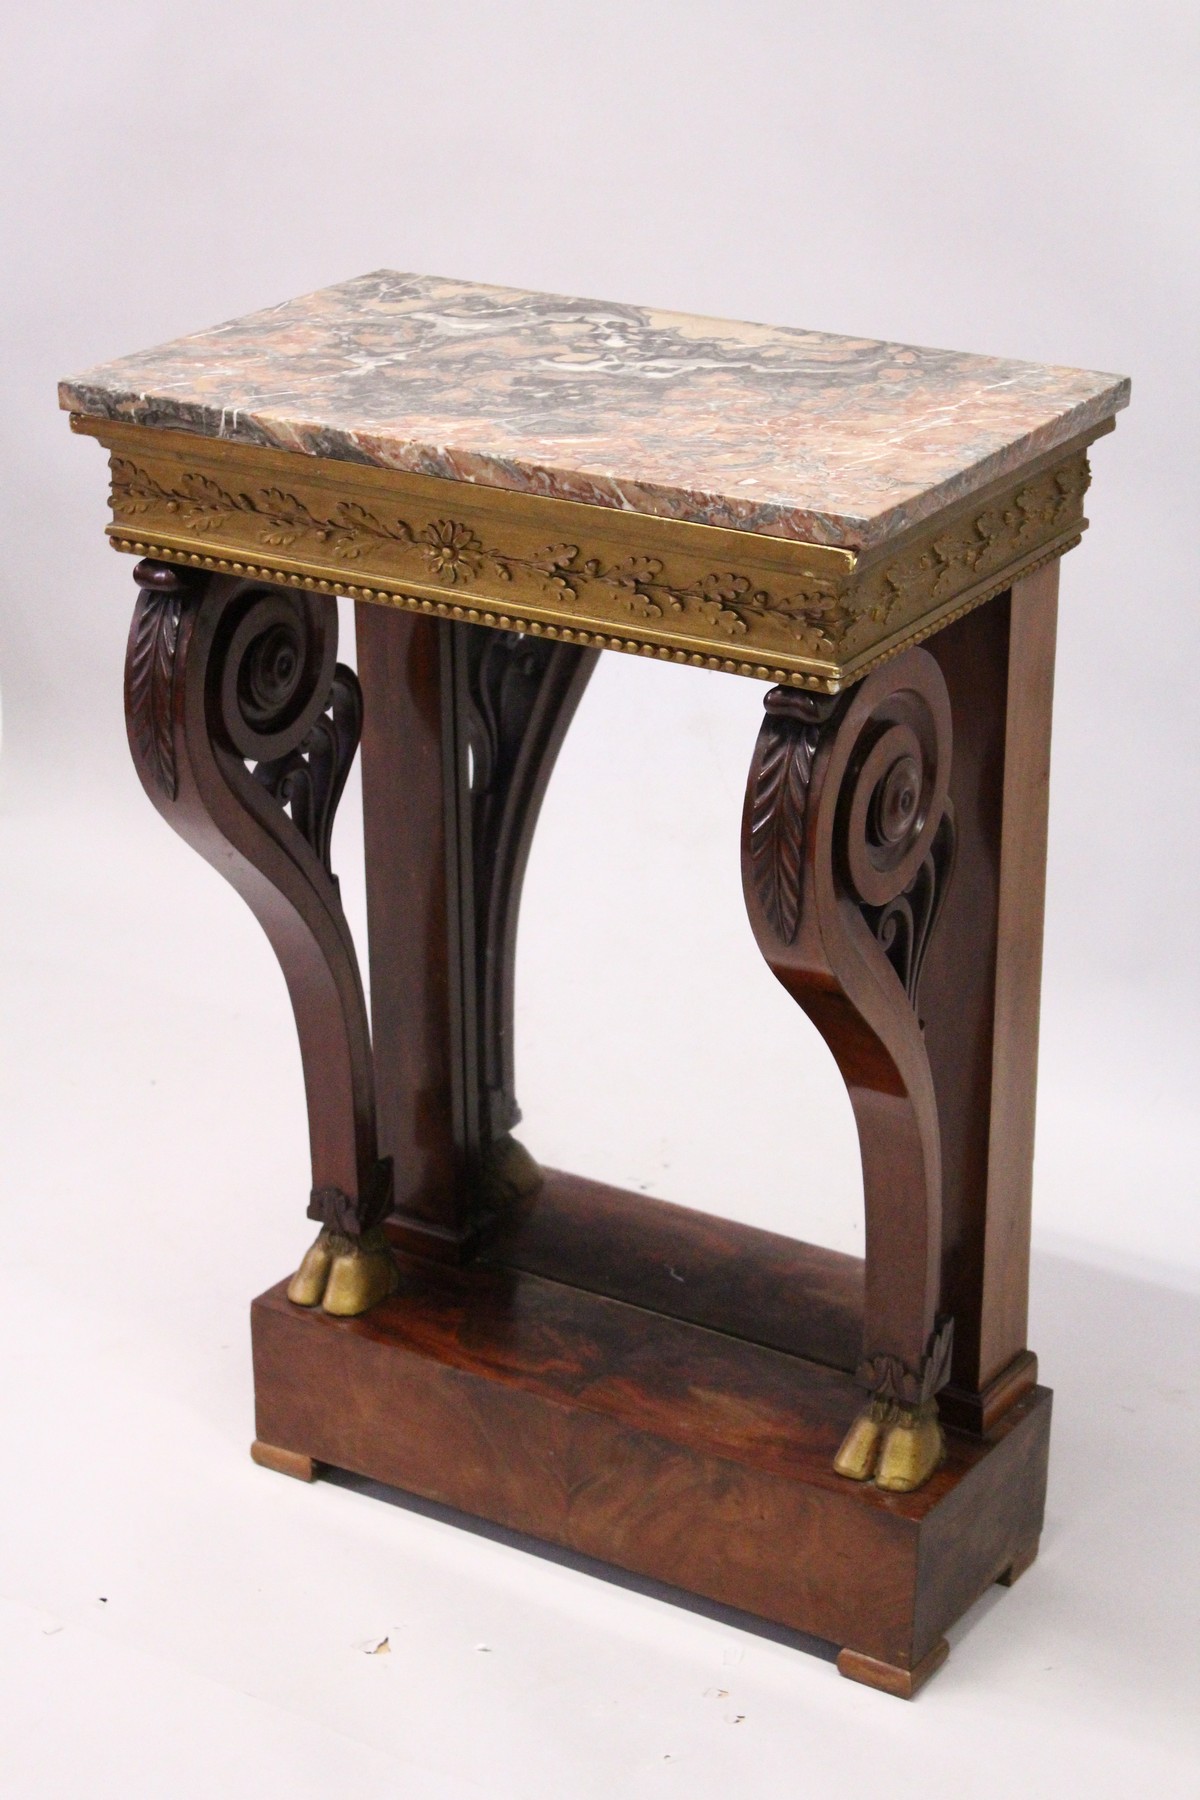 A REGENCY MAHOGANY SMALL PIER/CONSOLE TABLE, with a marble top over an ornate gilded frieze, on a - Image 2 of 6